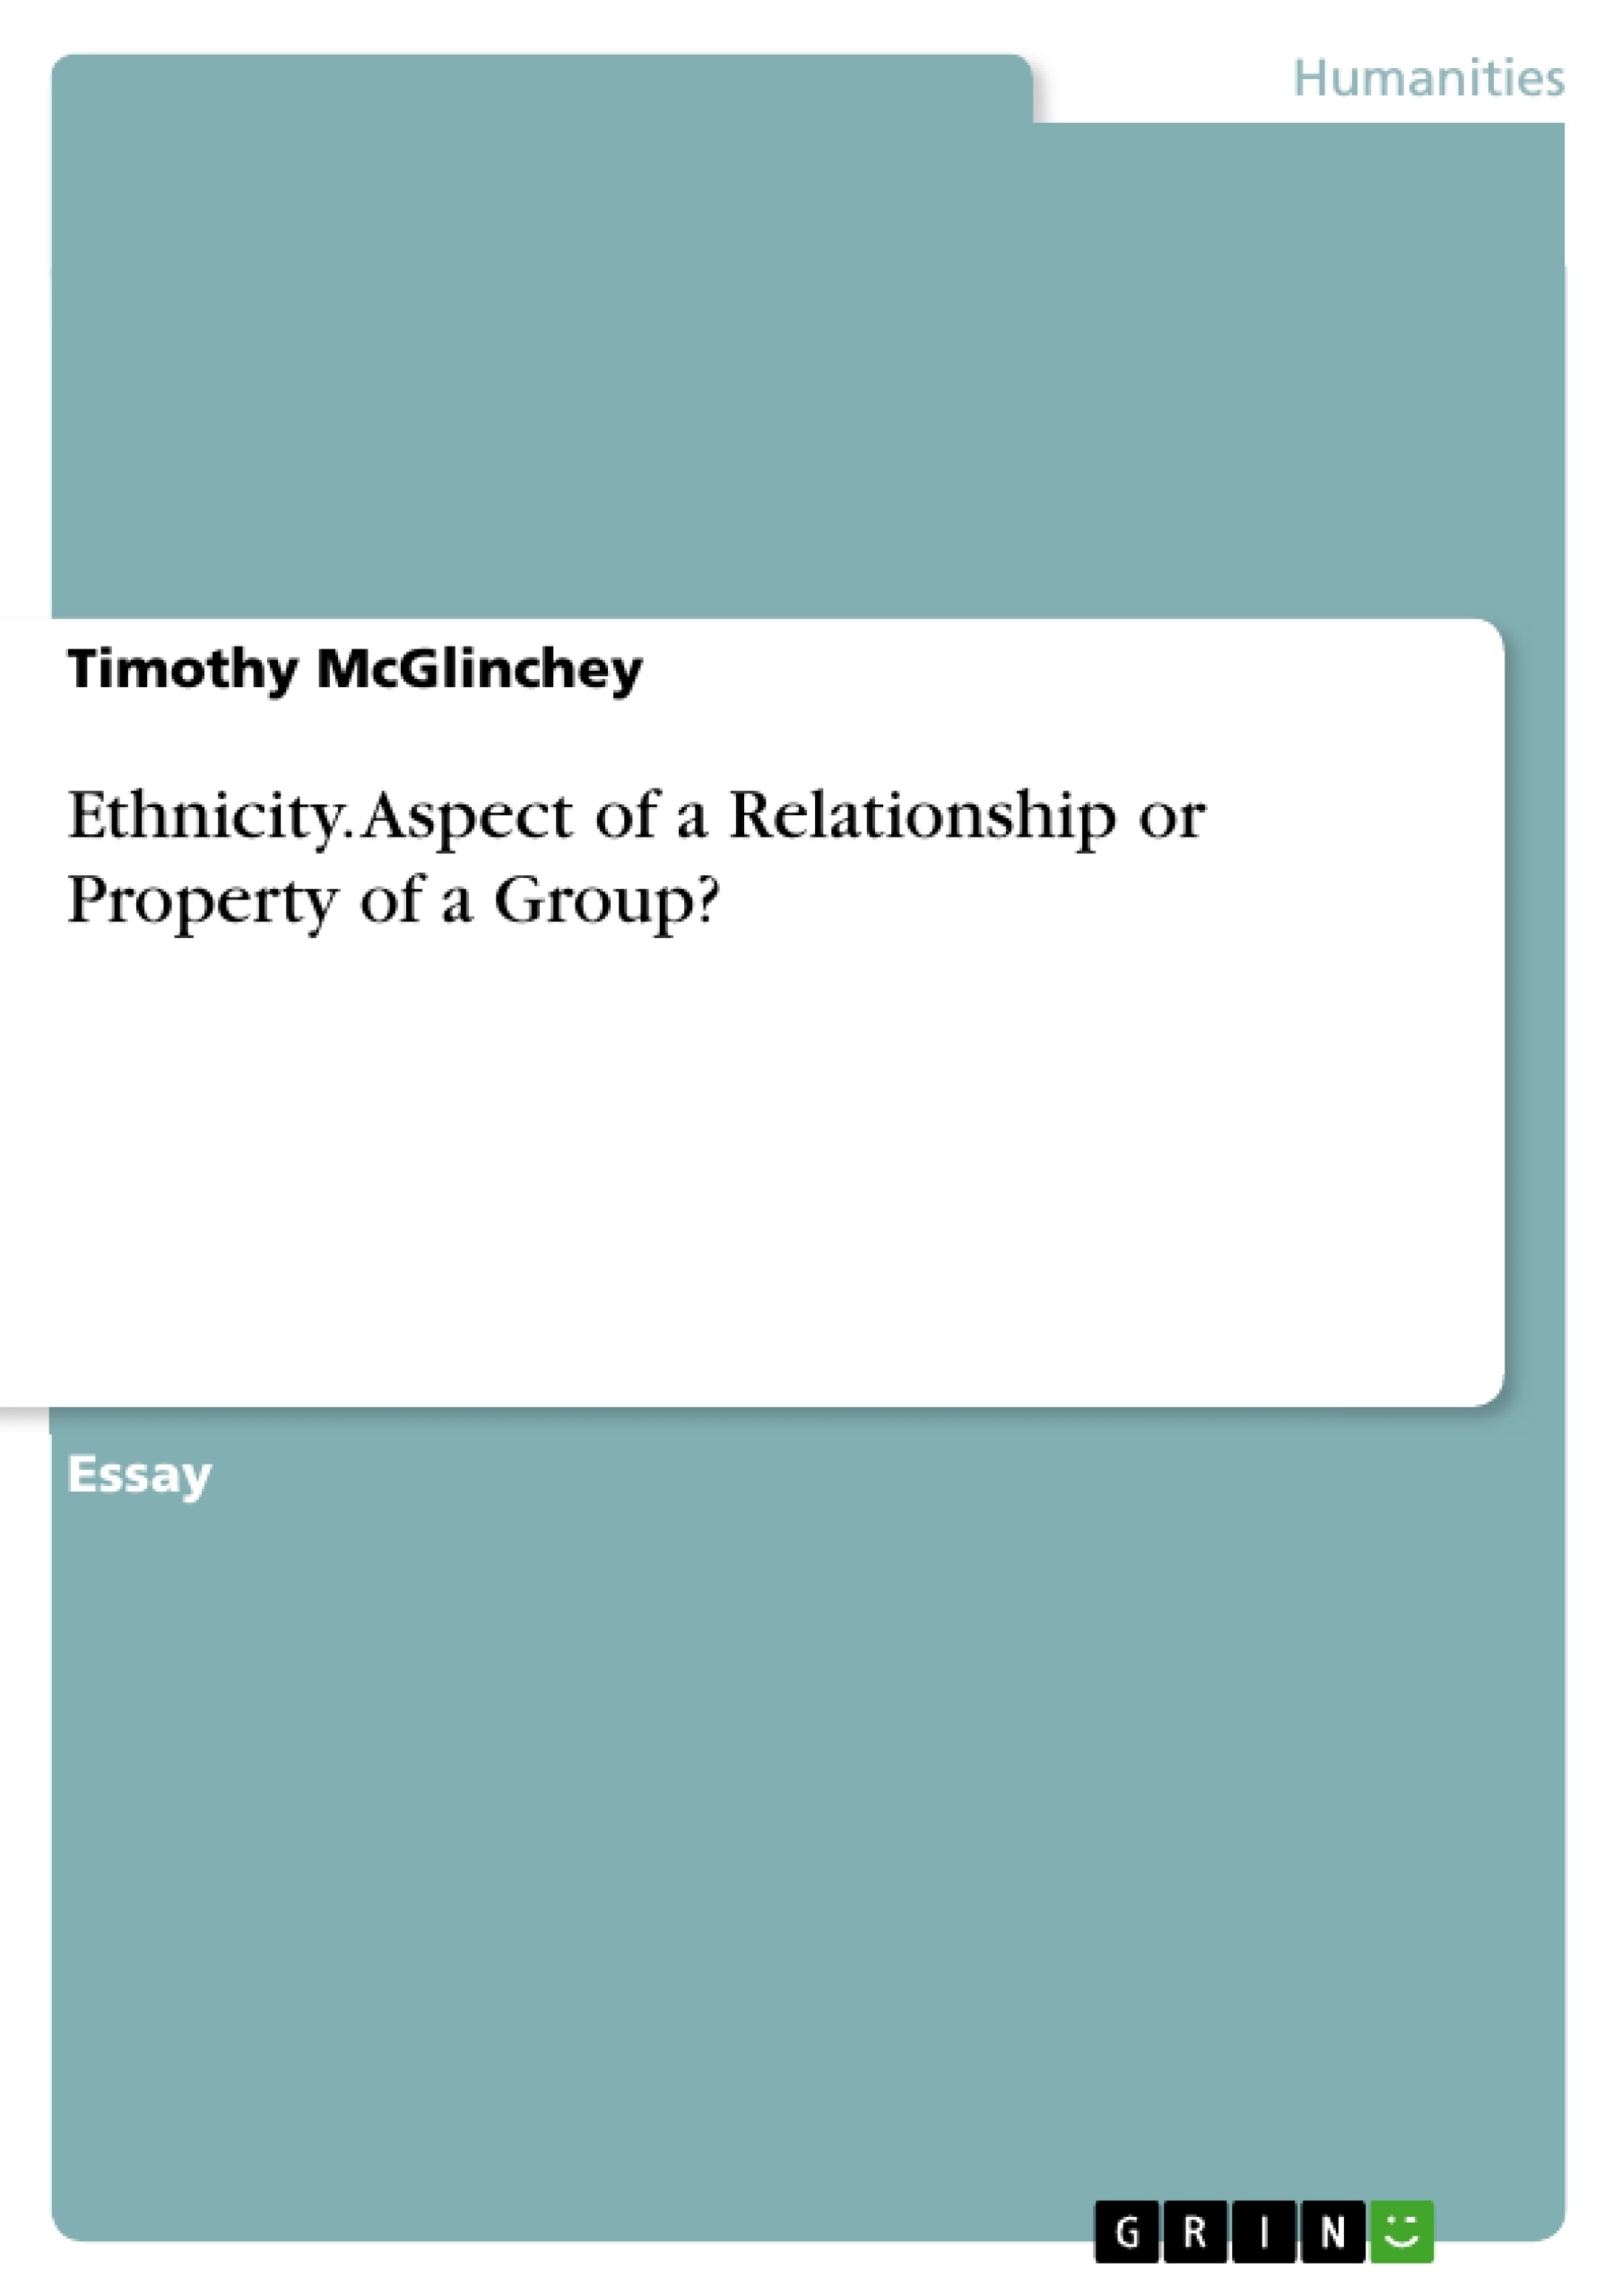 Titre: Ethnicity. Aspect of a Relationship or Property of a Group?